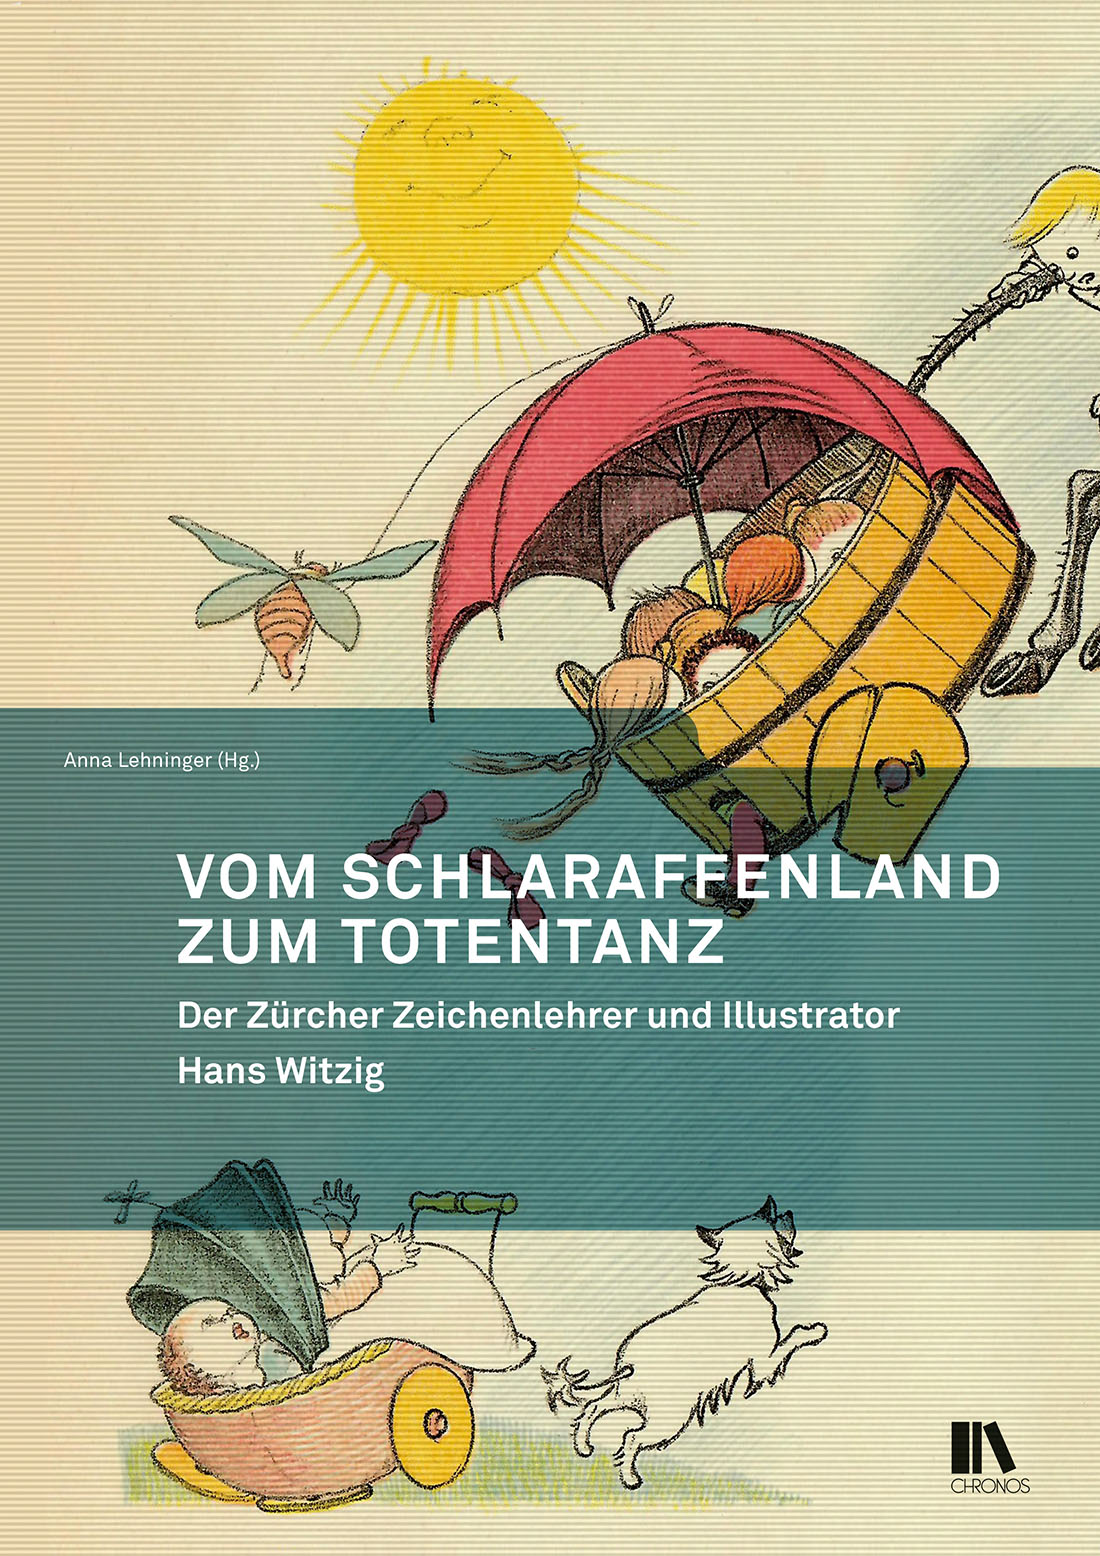 ‘From the Land of Plenty to the Dance of Death – the Zurich-based illustrator and drawing instructor Hans Witzig’, edited by Anna Lehninger